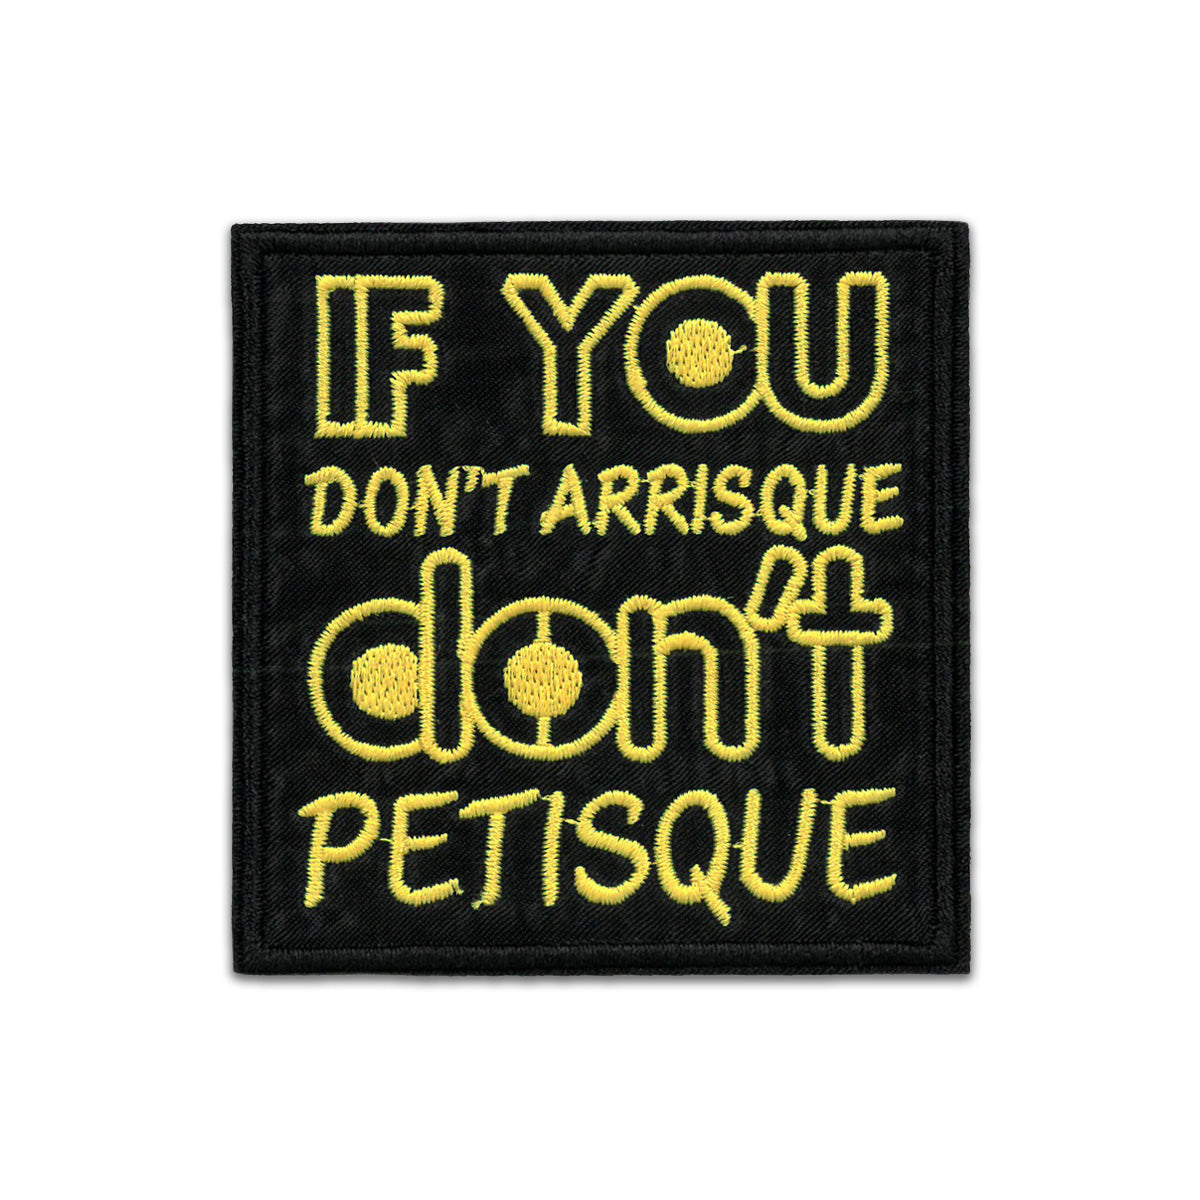 If you do't arrisque don't petisque